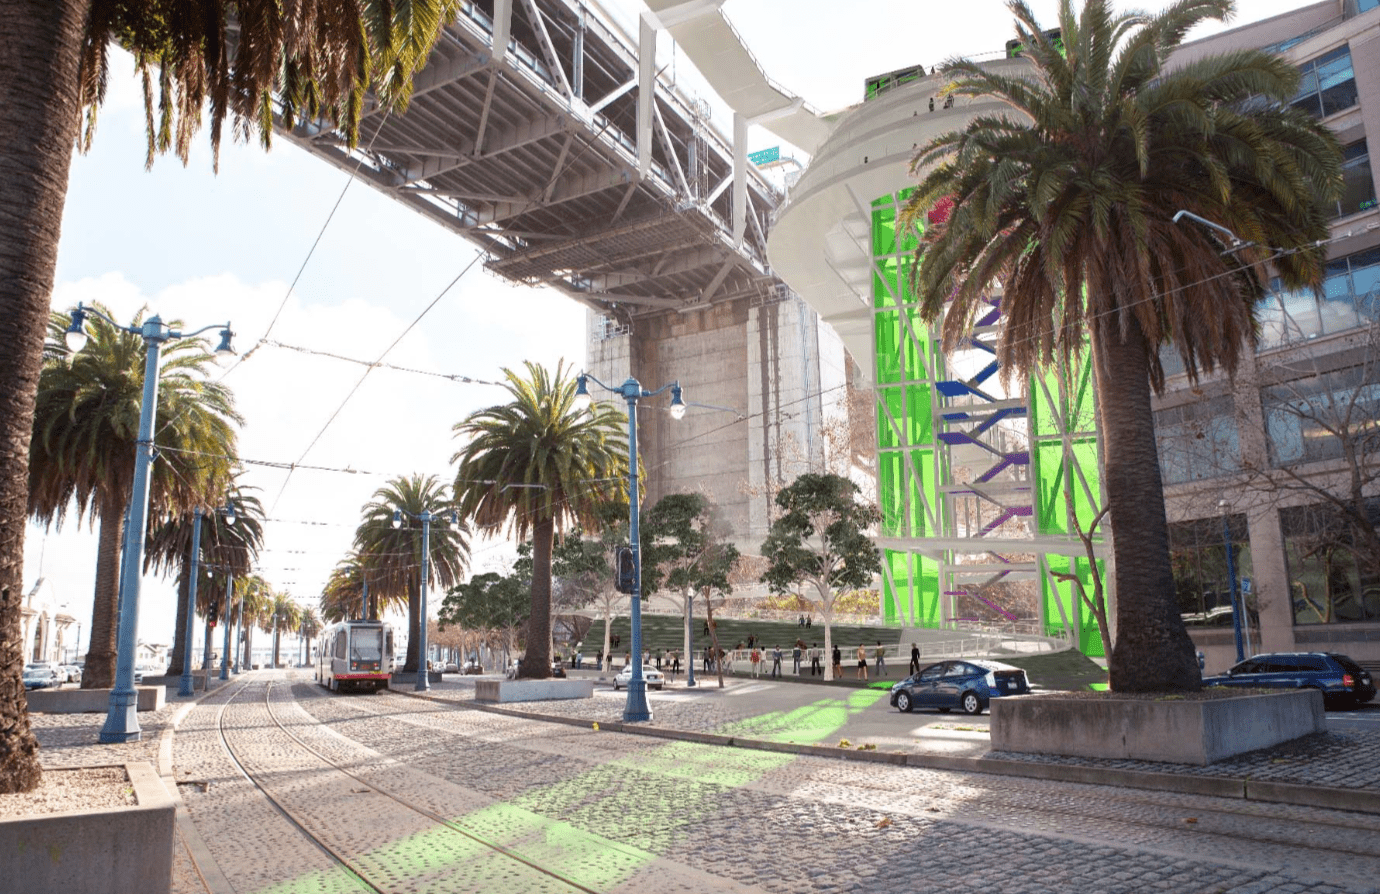 This Ridiculous Ramp Is SF’s Best Idea For A Bike Path Across The Entire Bay Bridge